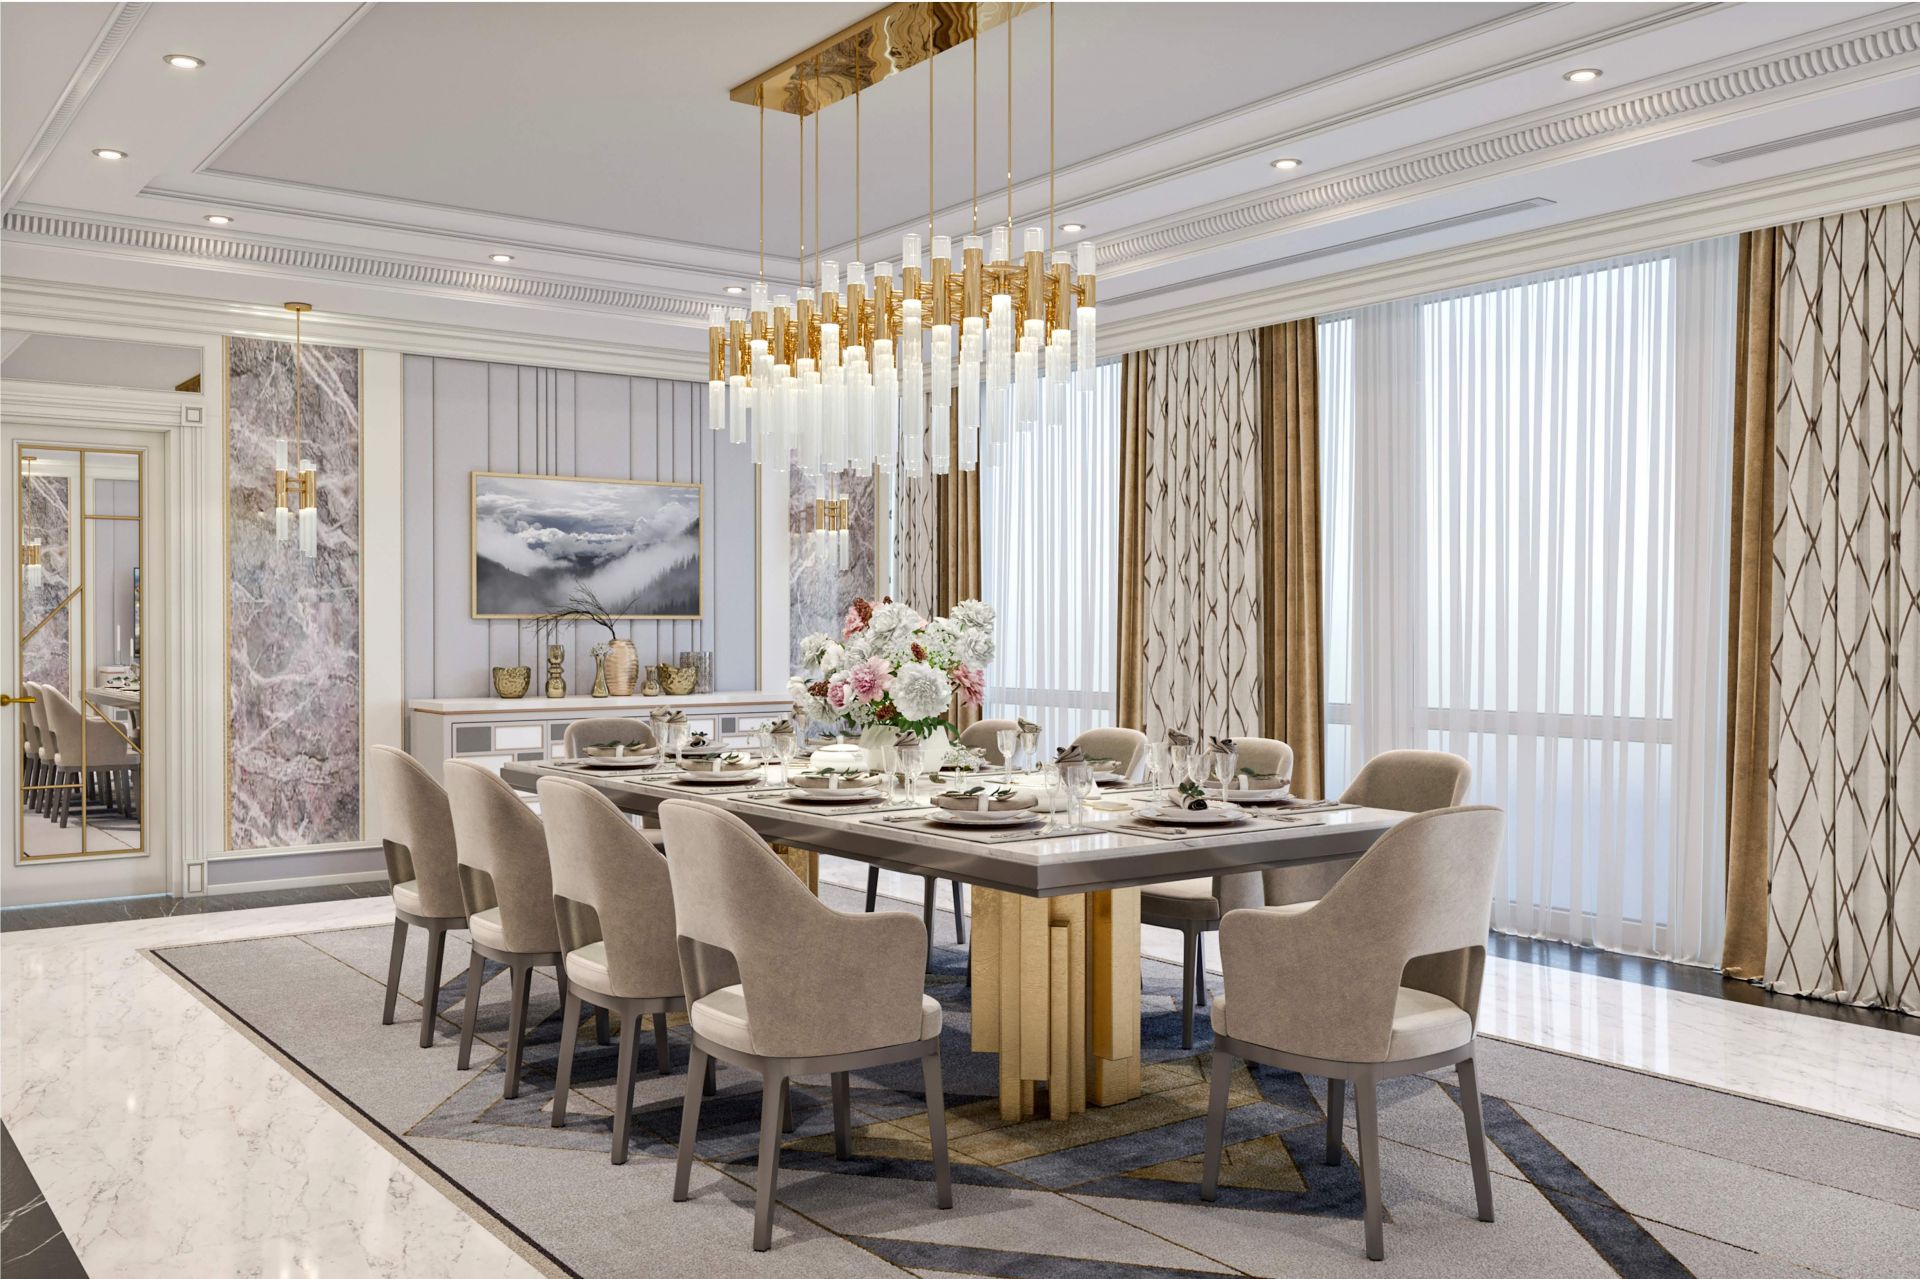 Design, Interior design of the living-dining room in the Hilton Hotel